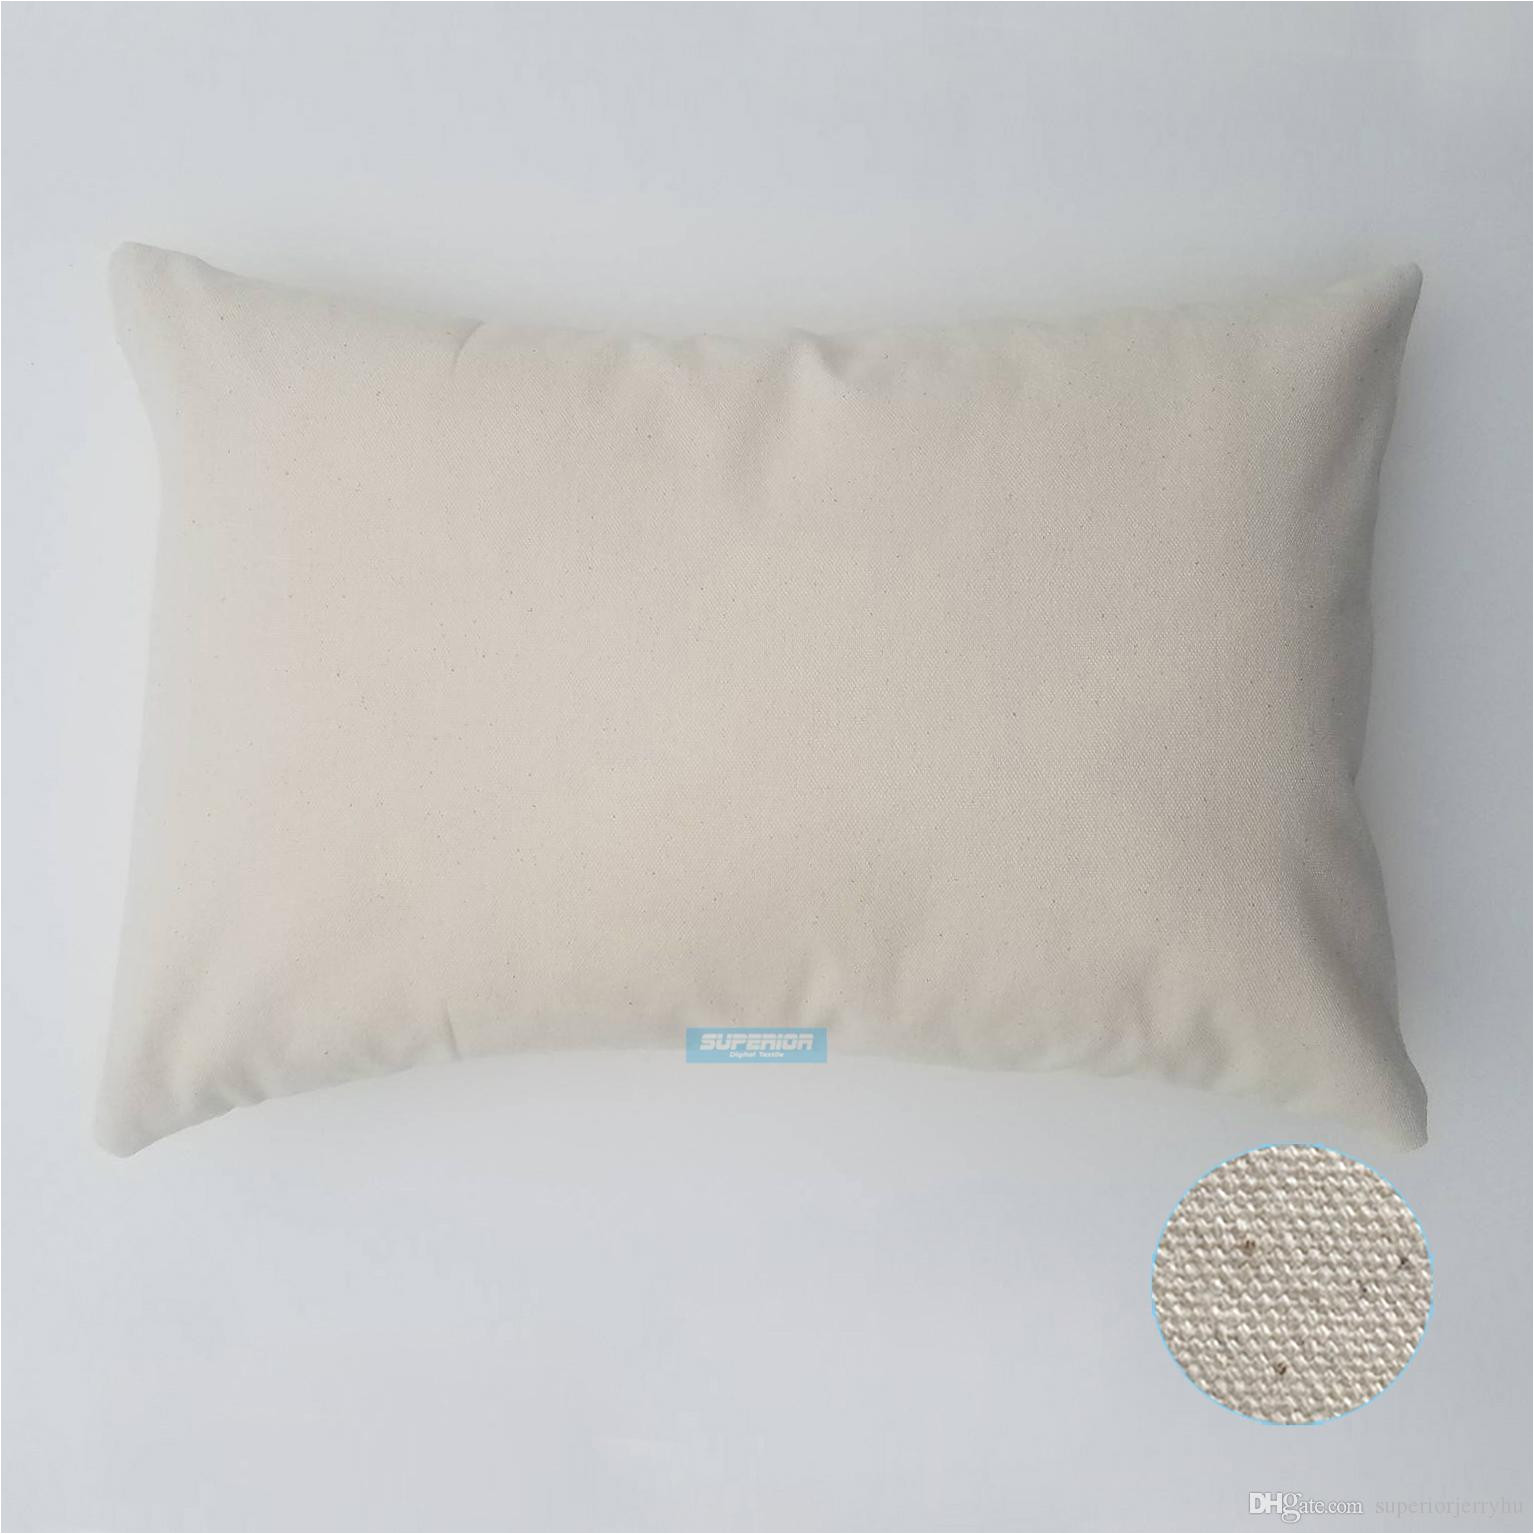 12x18 inches wholesale 8oz white or natural cotton canvas pillow cover blanks perfect for stencils painting embroidery htv exterior cushions lawn chair